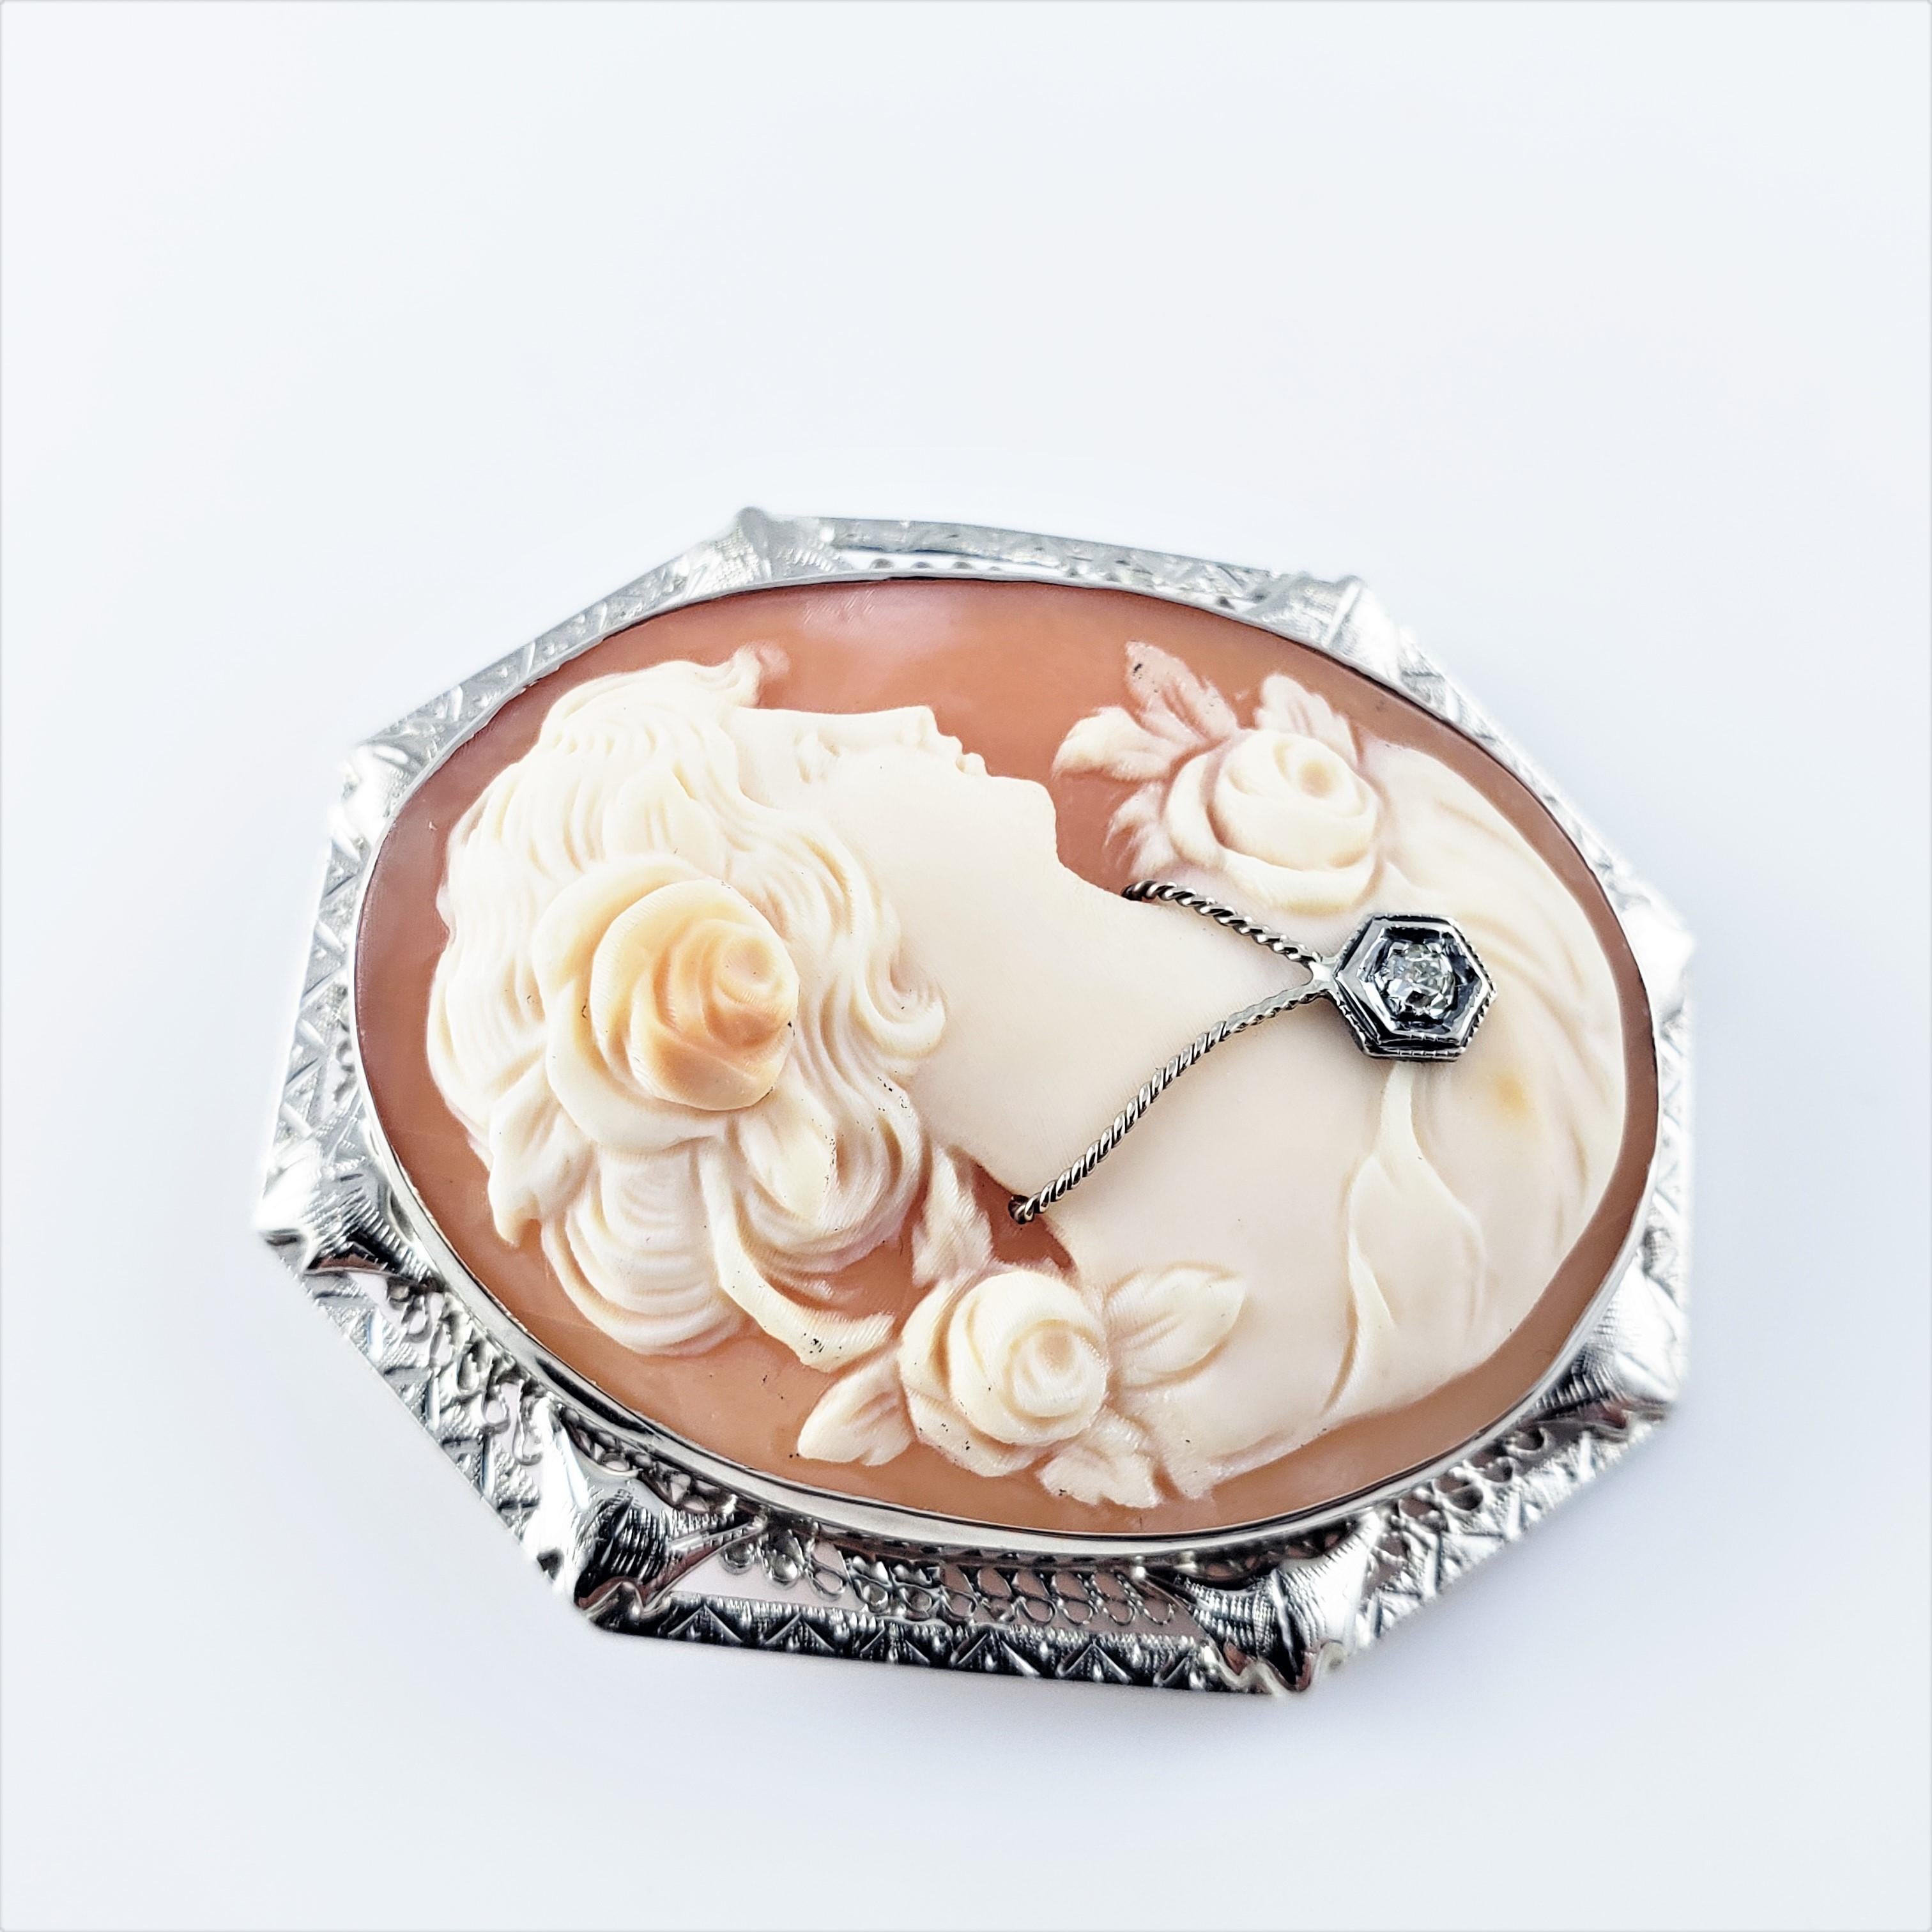 10 Karat White Gold Cameo Brooch / Pendant In Good Condition For Sale In Washington Depot, CT